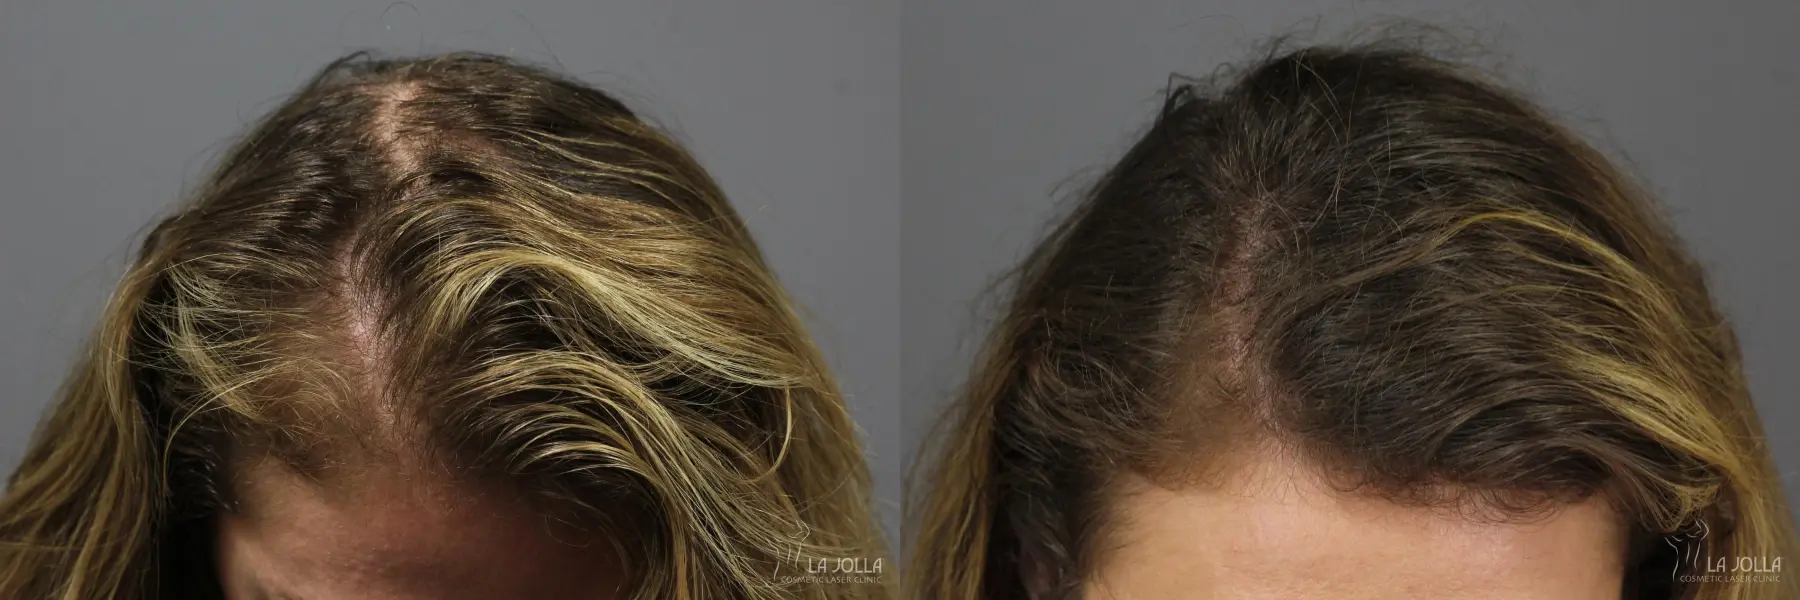 PRP (Platelet-Rich Plasma): Patient 3 - Before and After 1